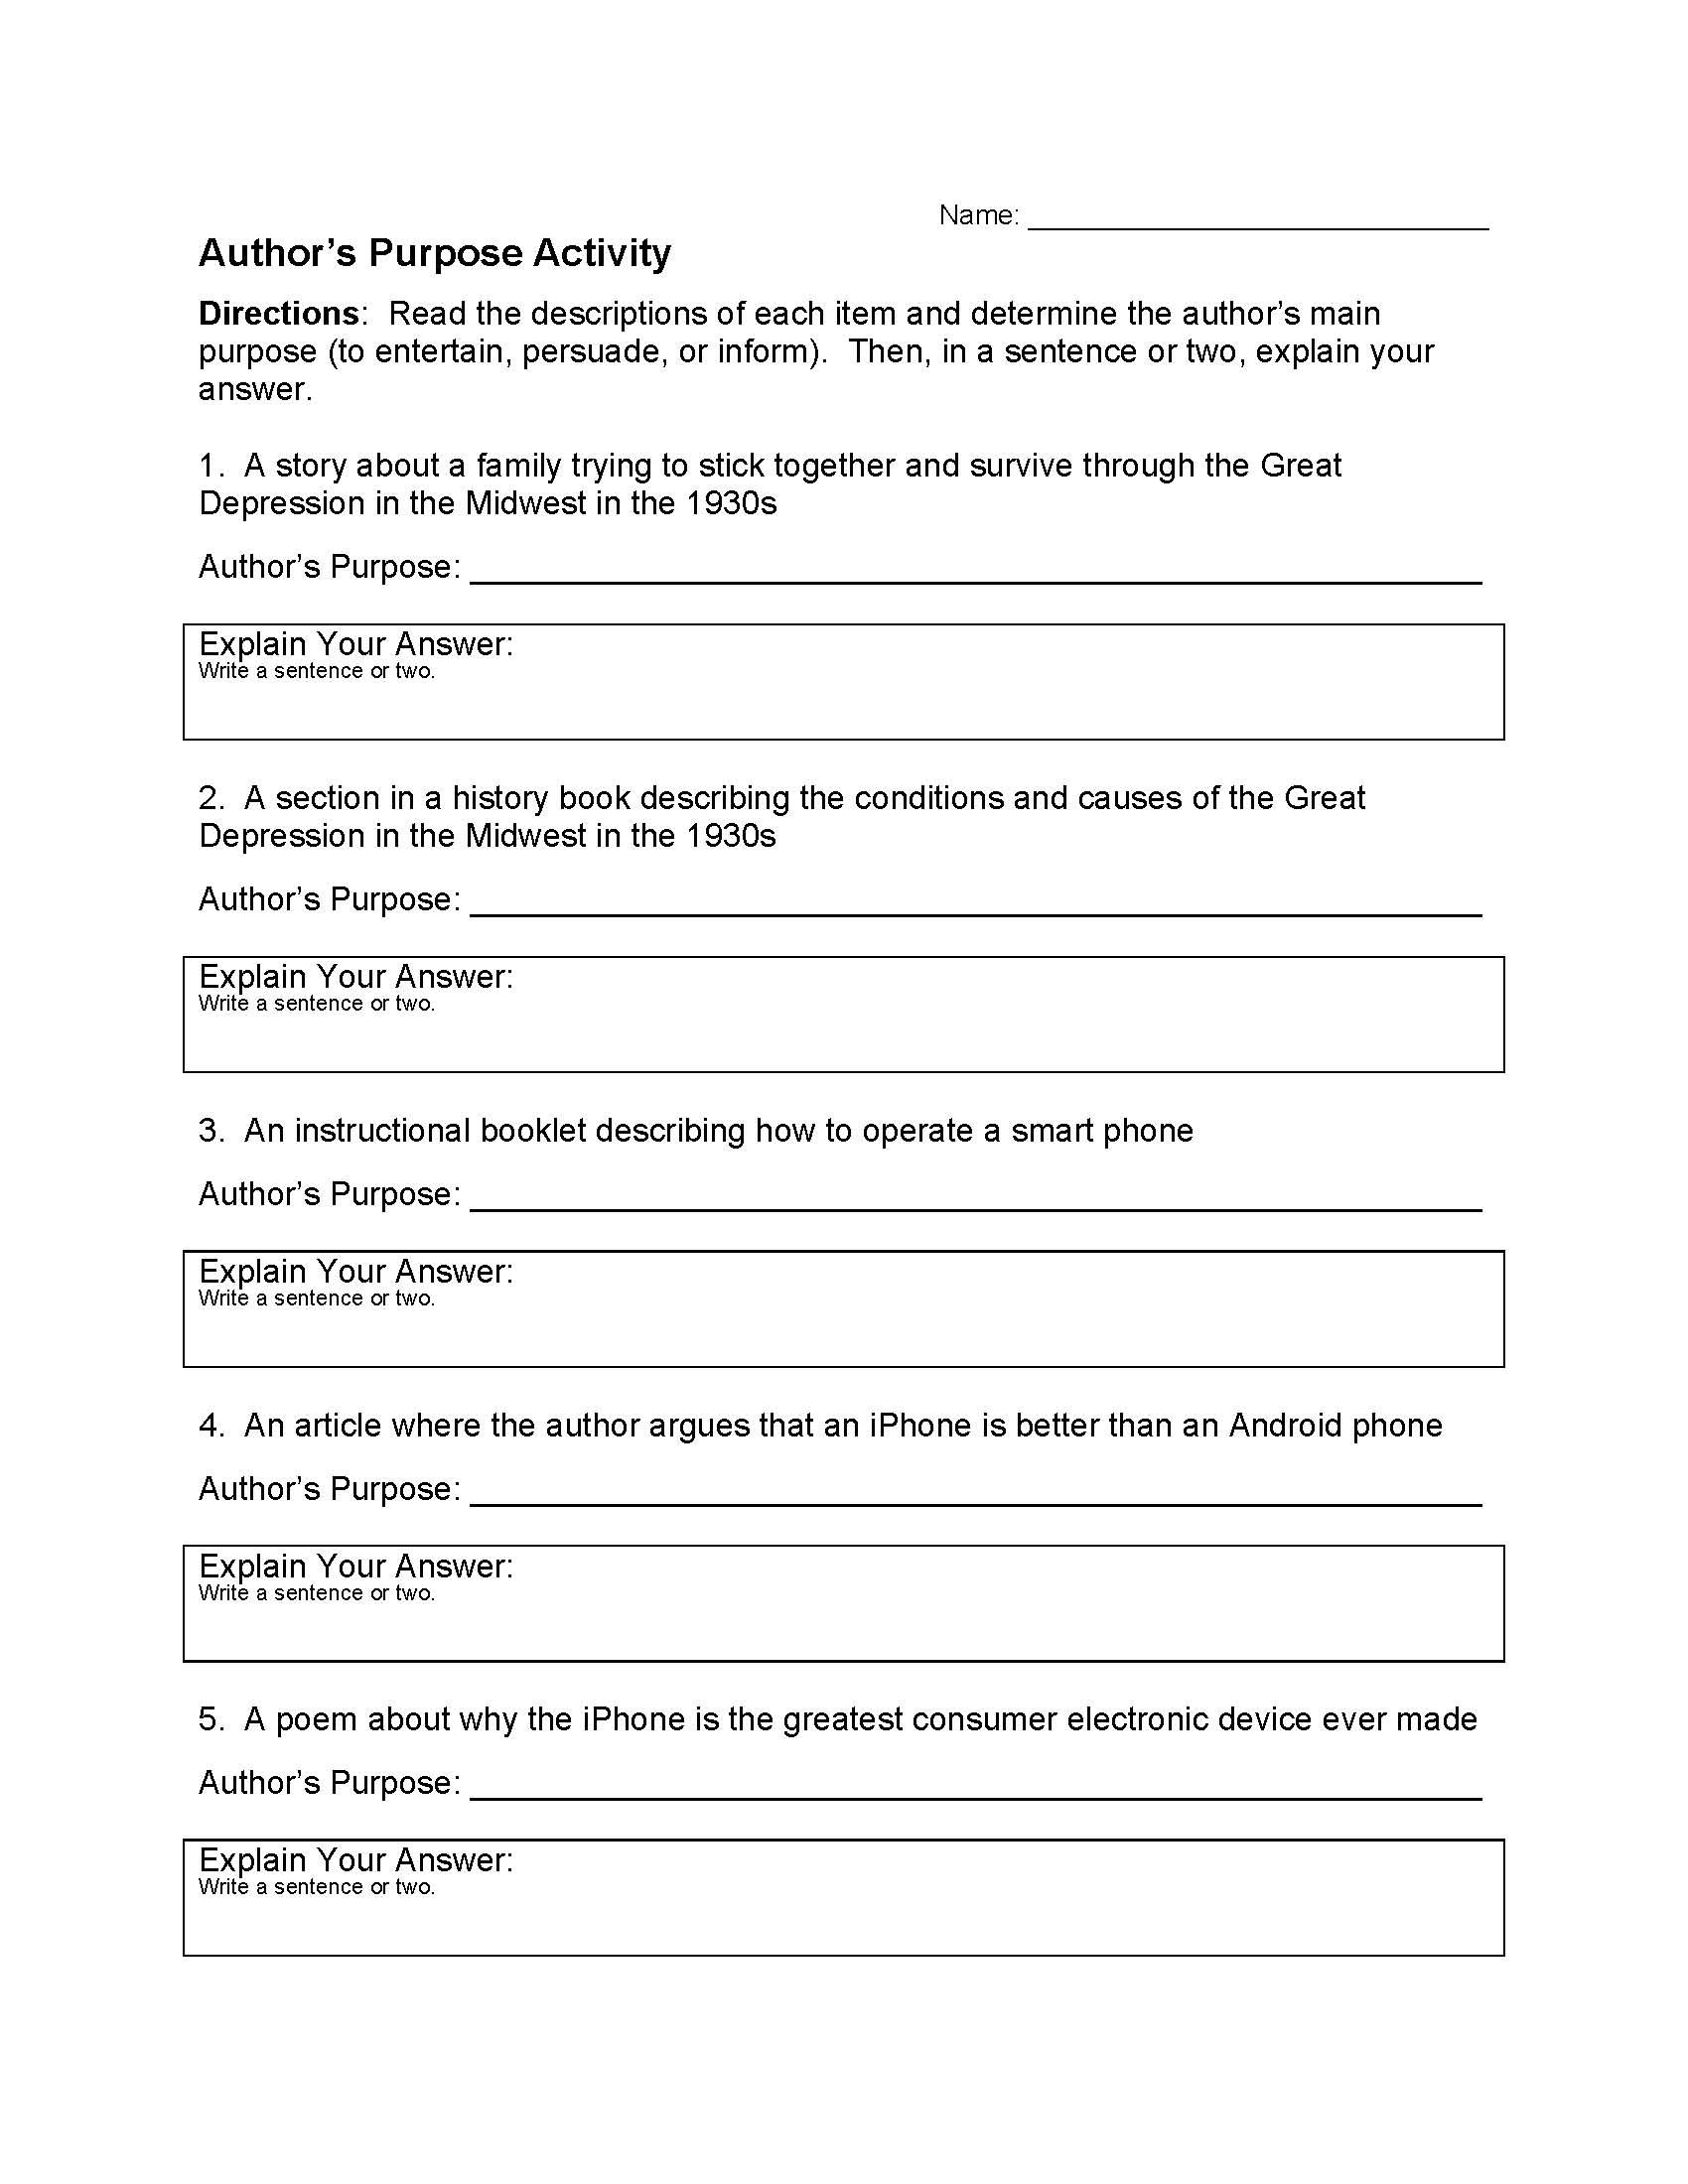 Author's Purpose Worksheet 1  Preview And The Great Depression Worksheet